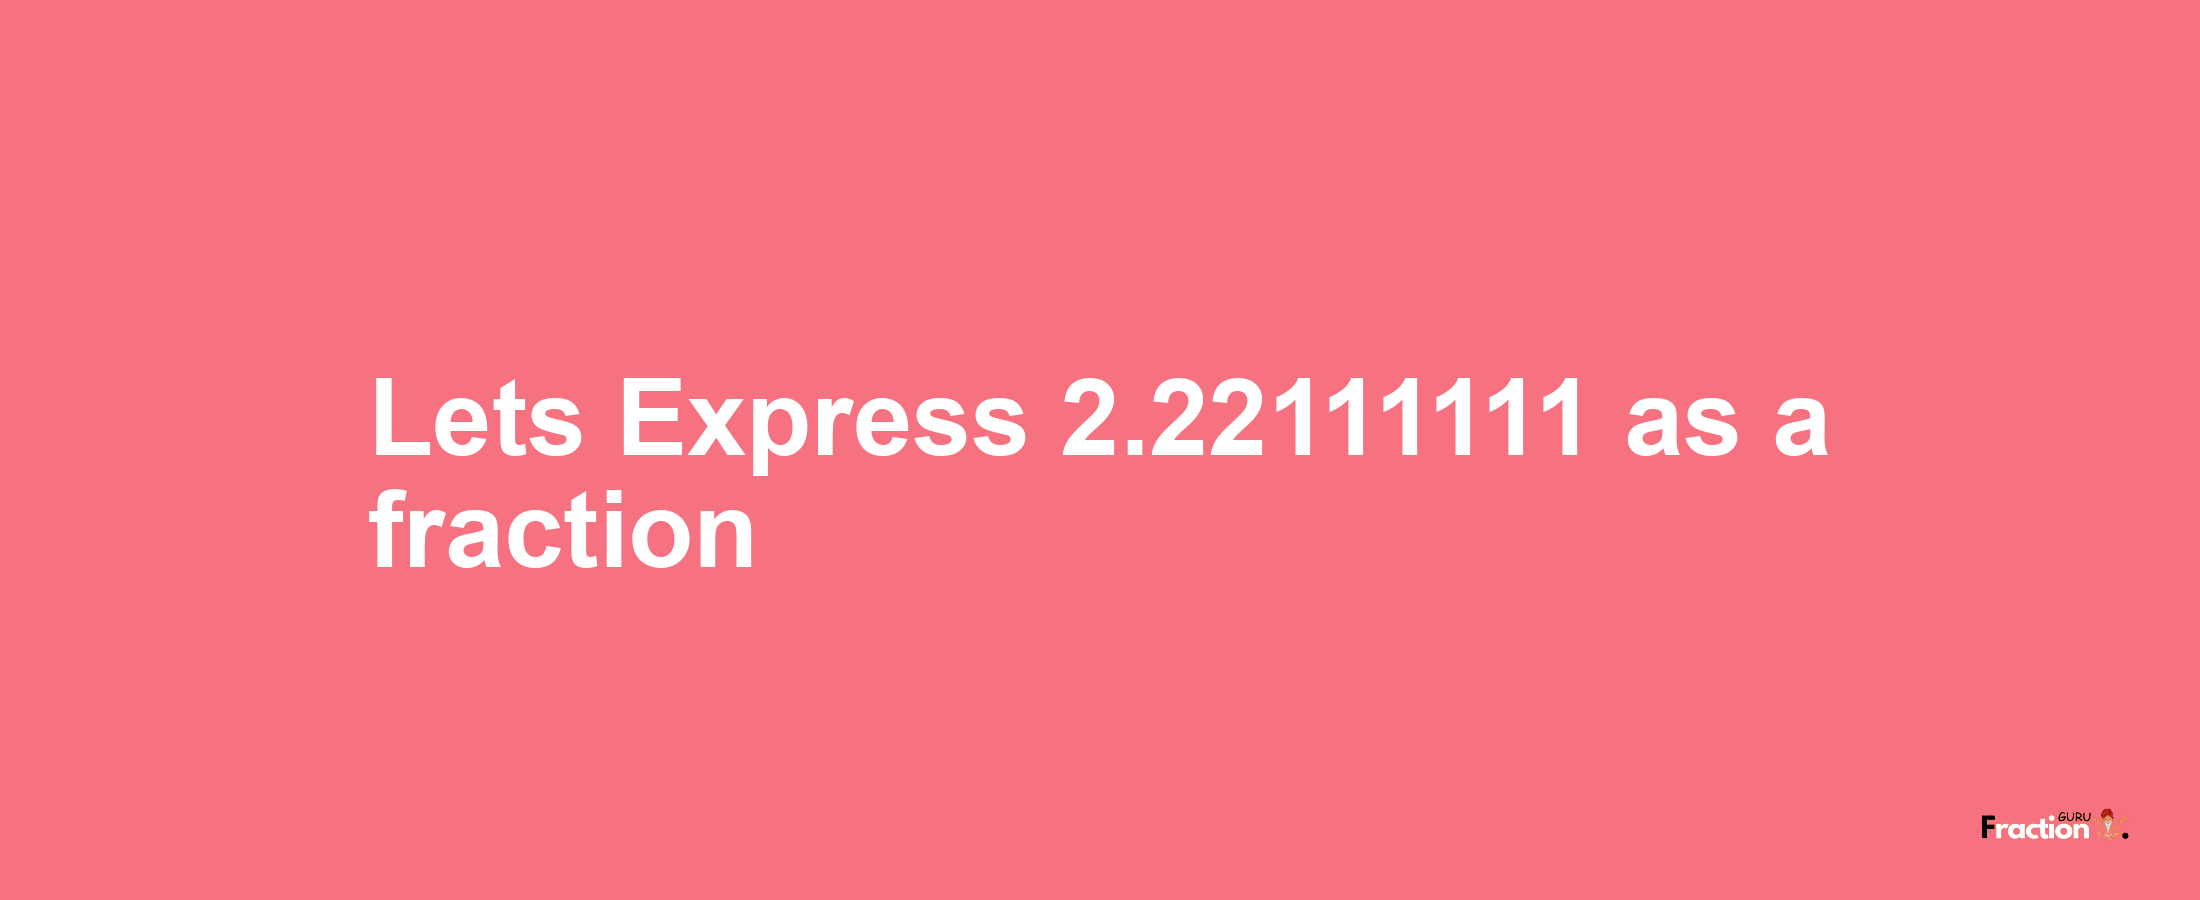 Lets Express 2.22111111 as afraction